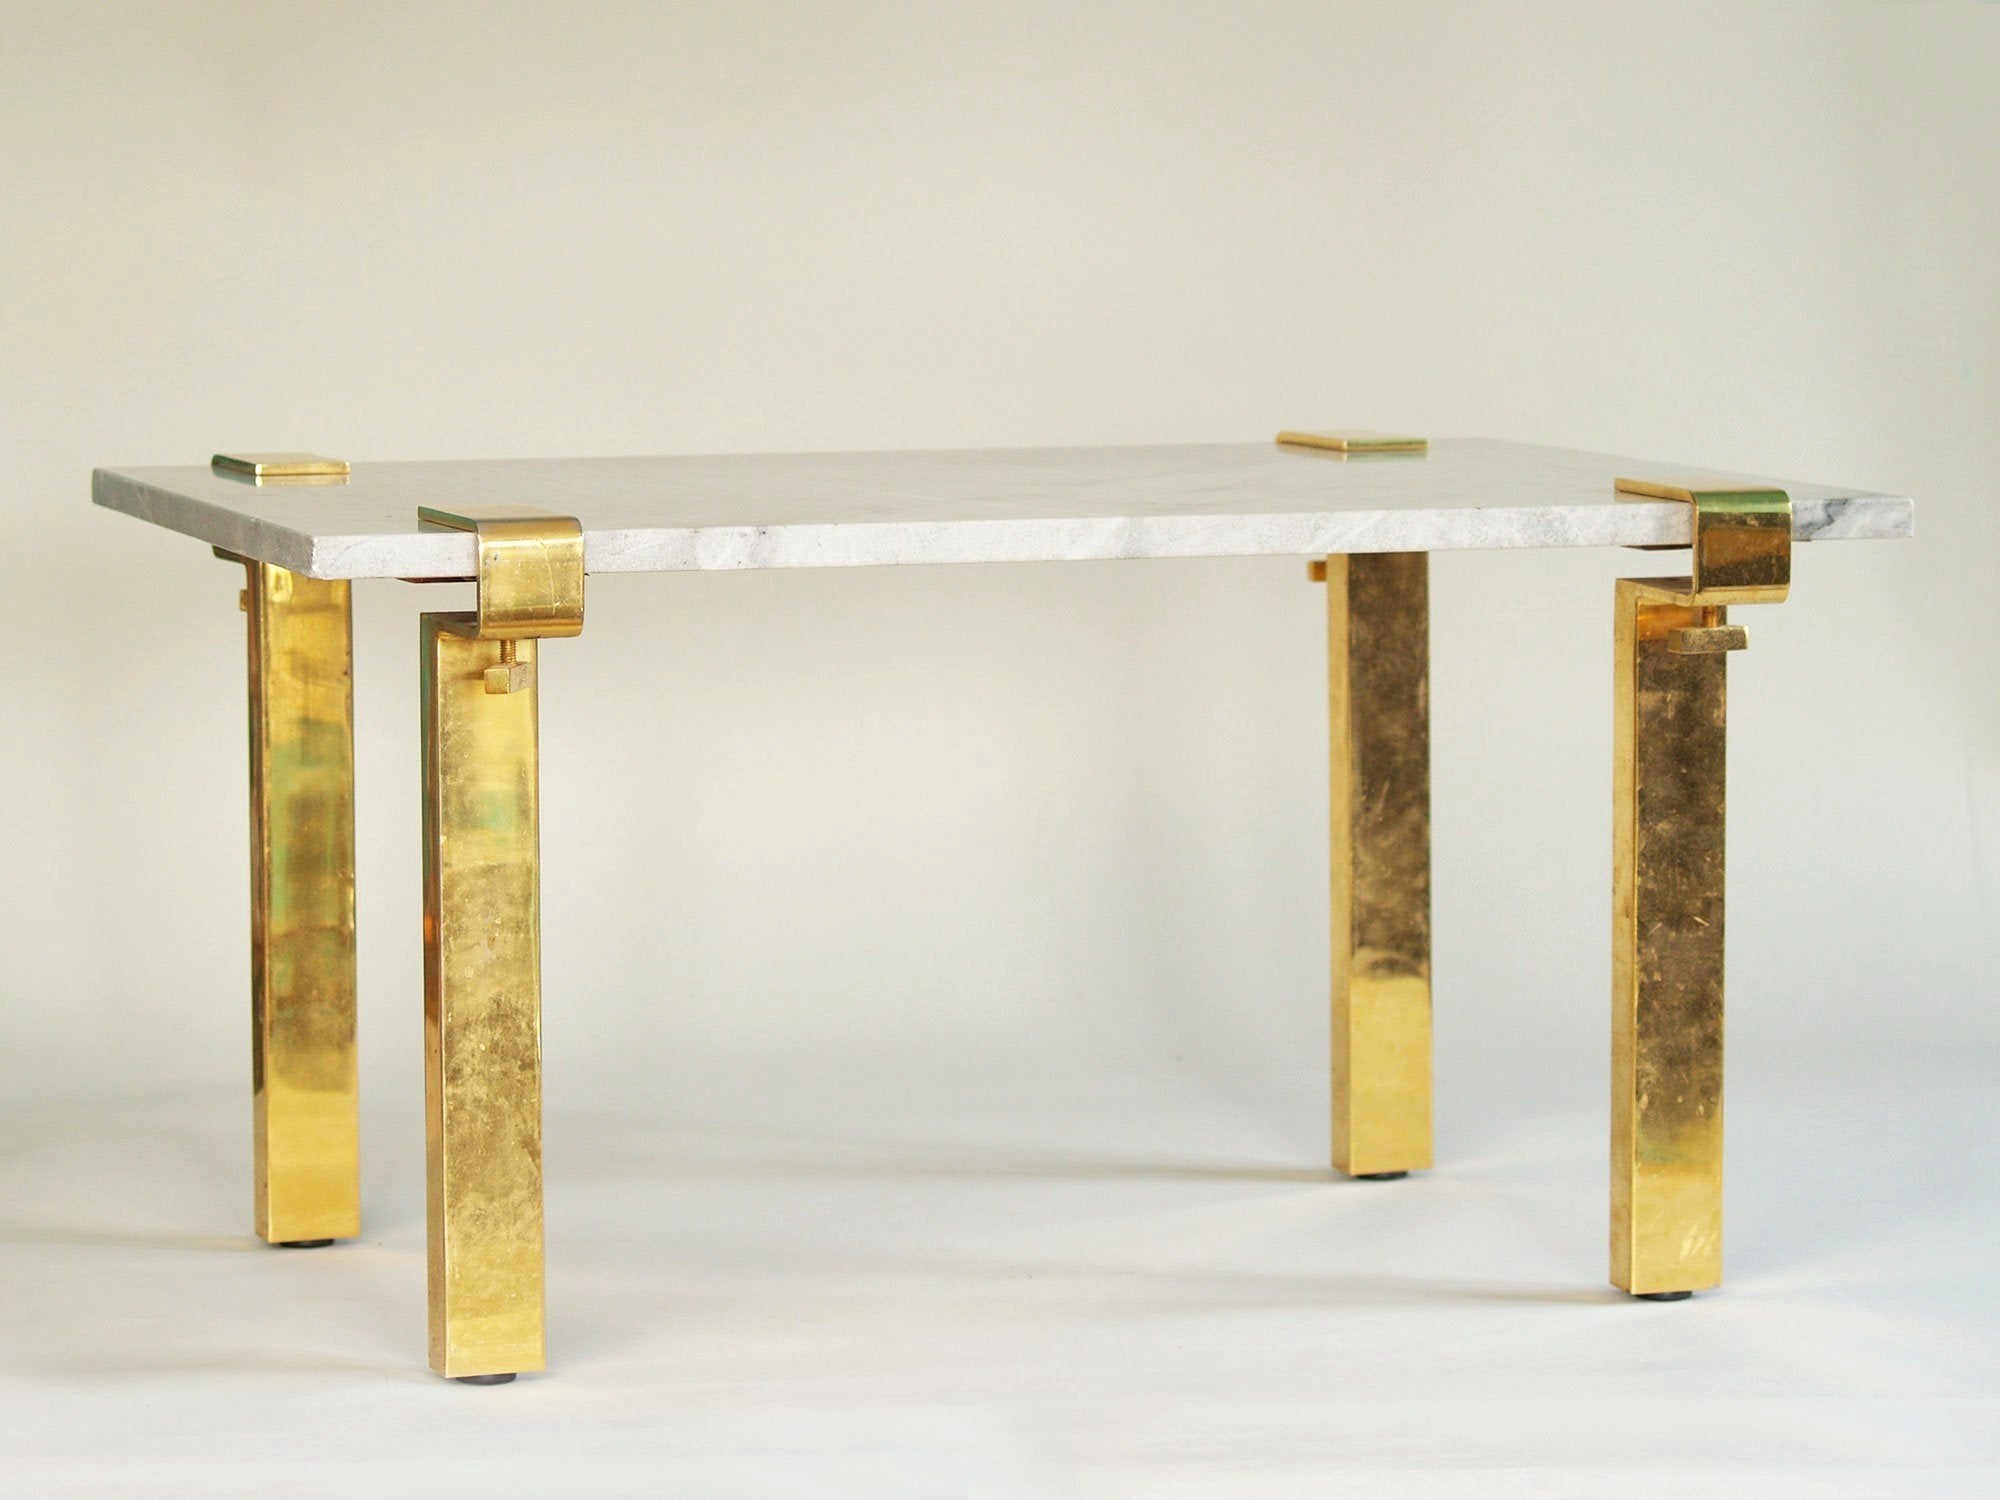 Table basse serre&#x2011;joints T9 de François Arnal & Atelier A, France (1971)..T9 coffee table stand by François Arnal & Atelier A, France (1971)